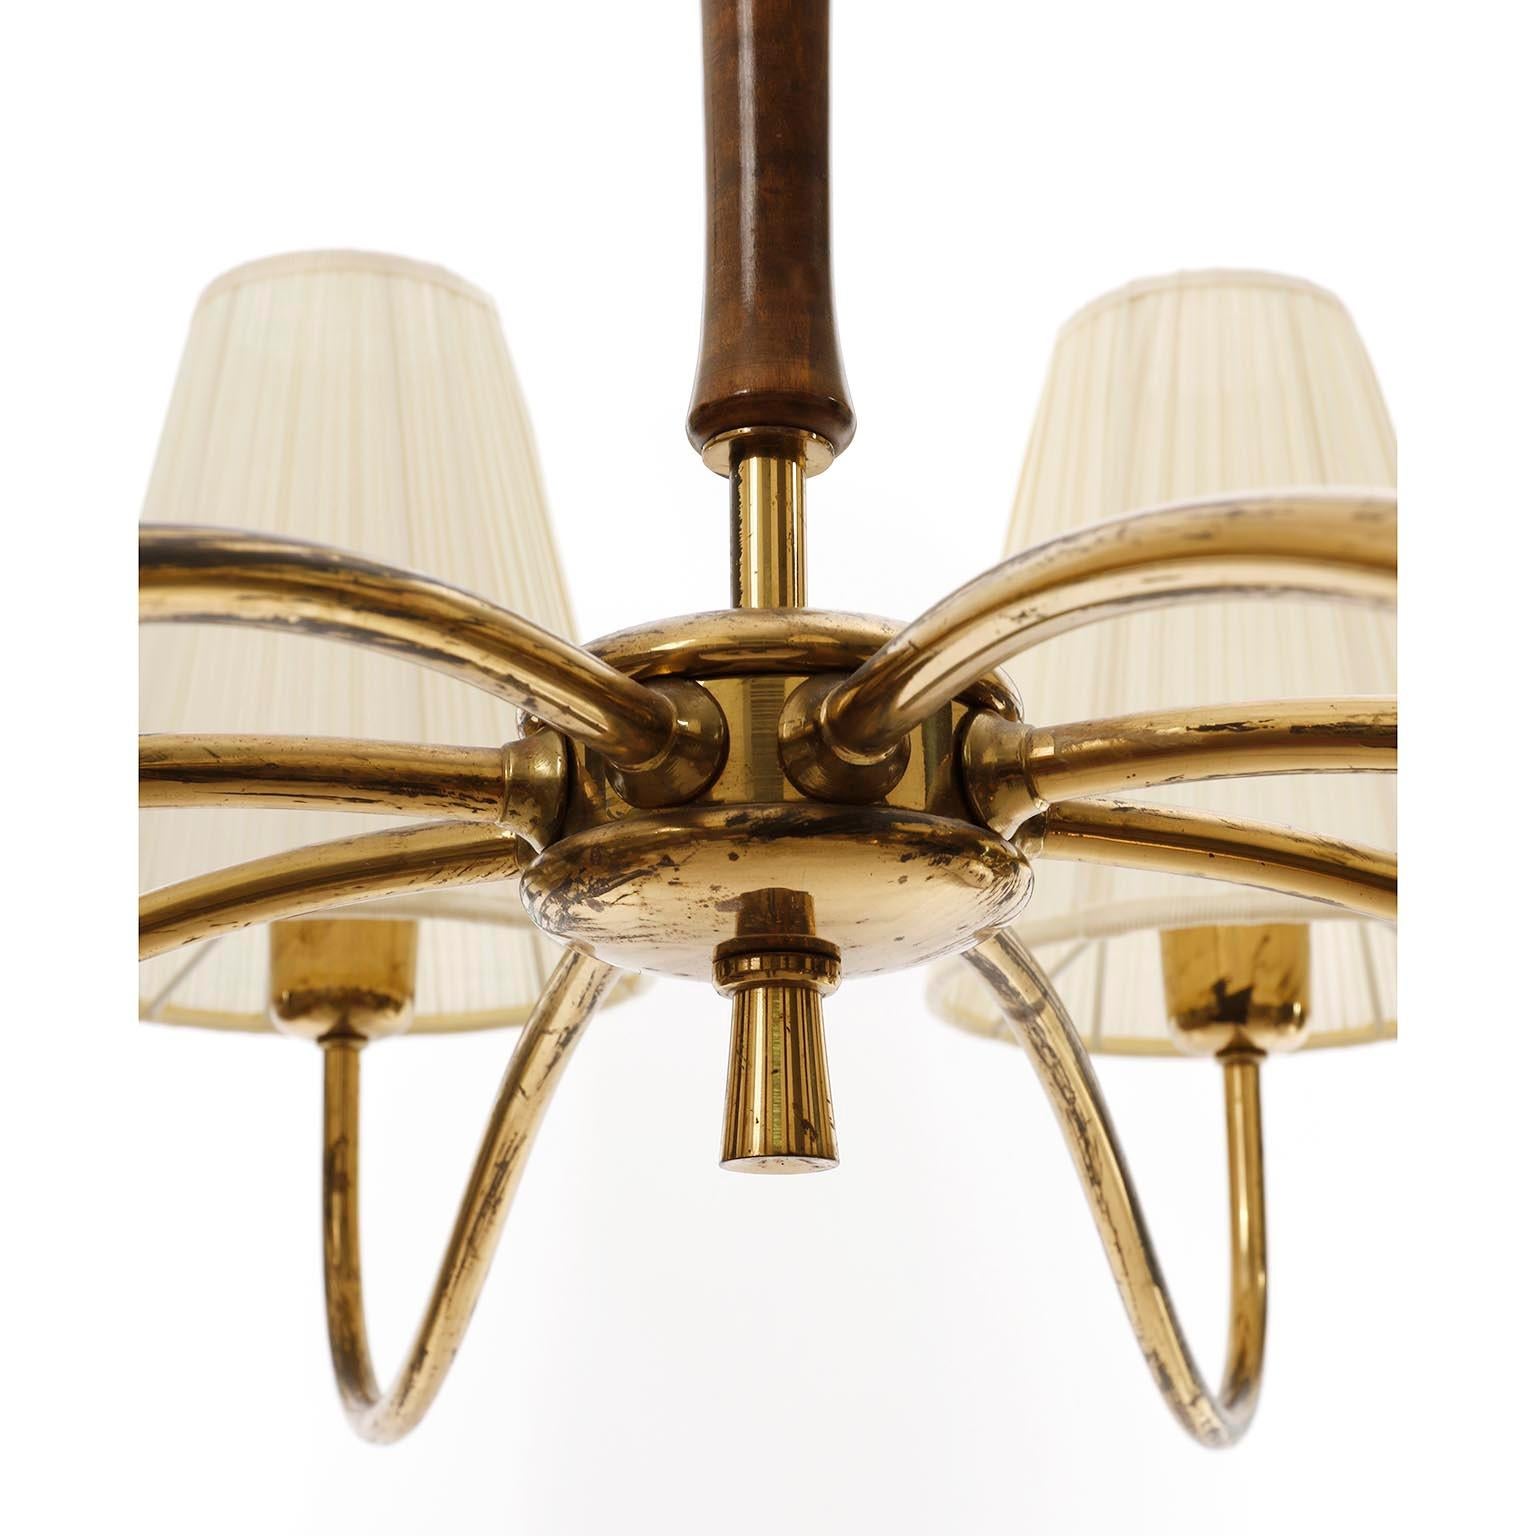 Large Art Deco Chandelier Pendant Light, Wood Brass Cream Fabric Shades, 1930s In Good Condition For Sale In Hausmannstätten, AT